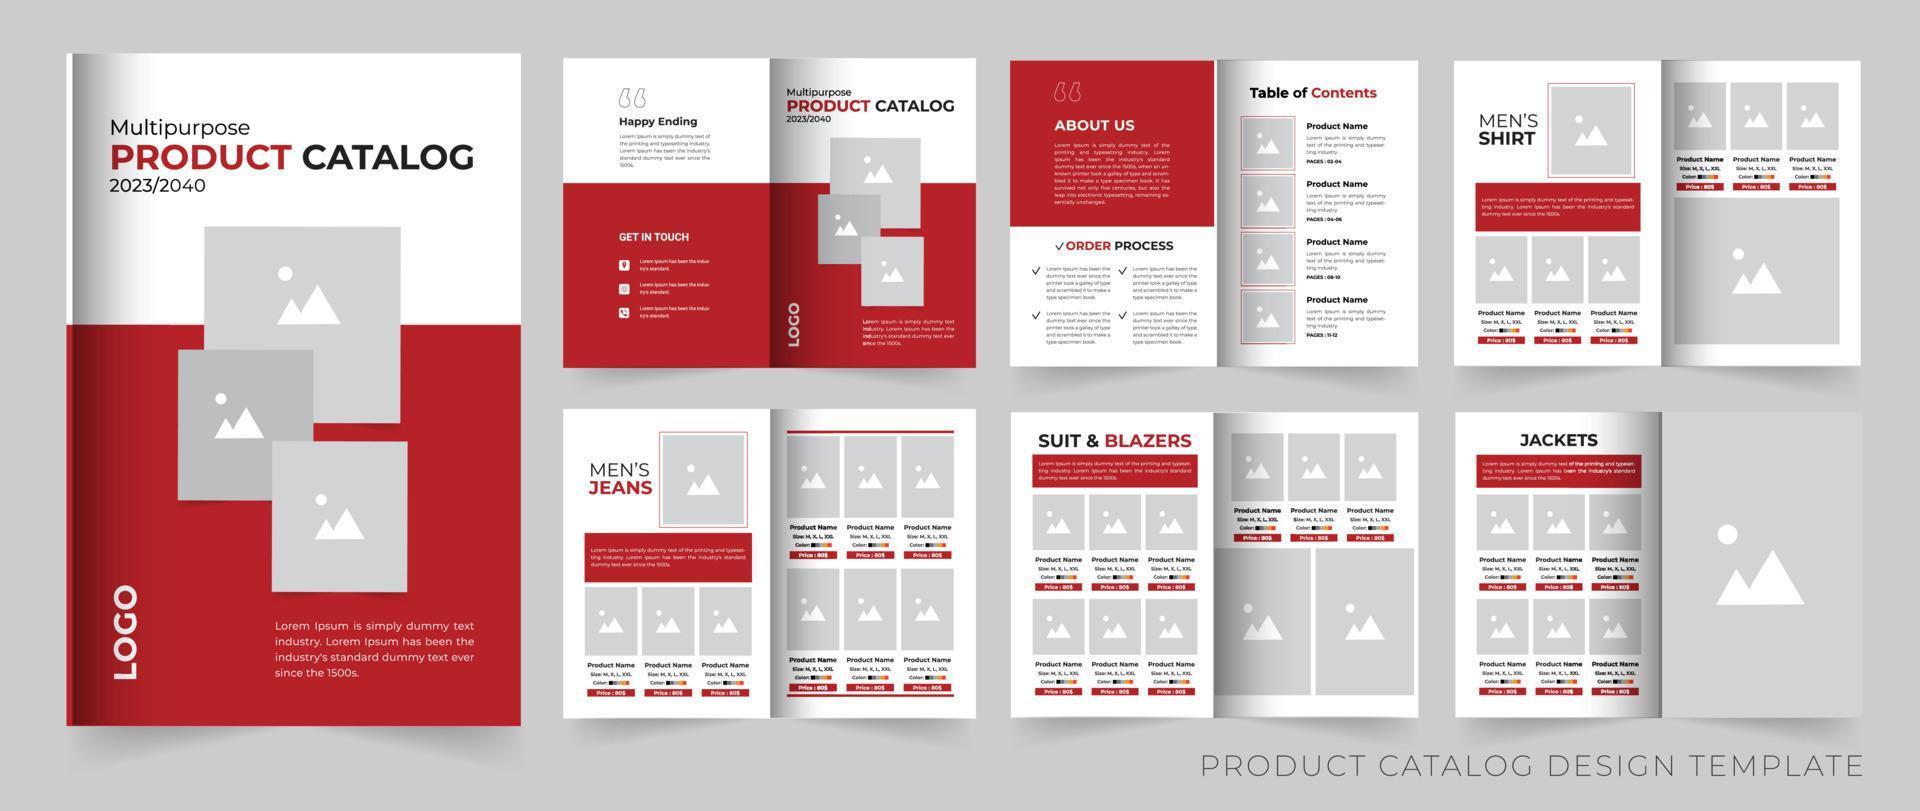 multipurpose Product catalogus of catalogus ontwerp sjabloon vector